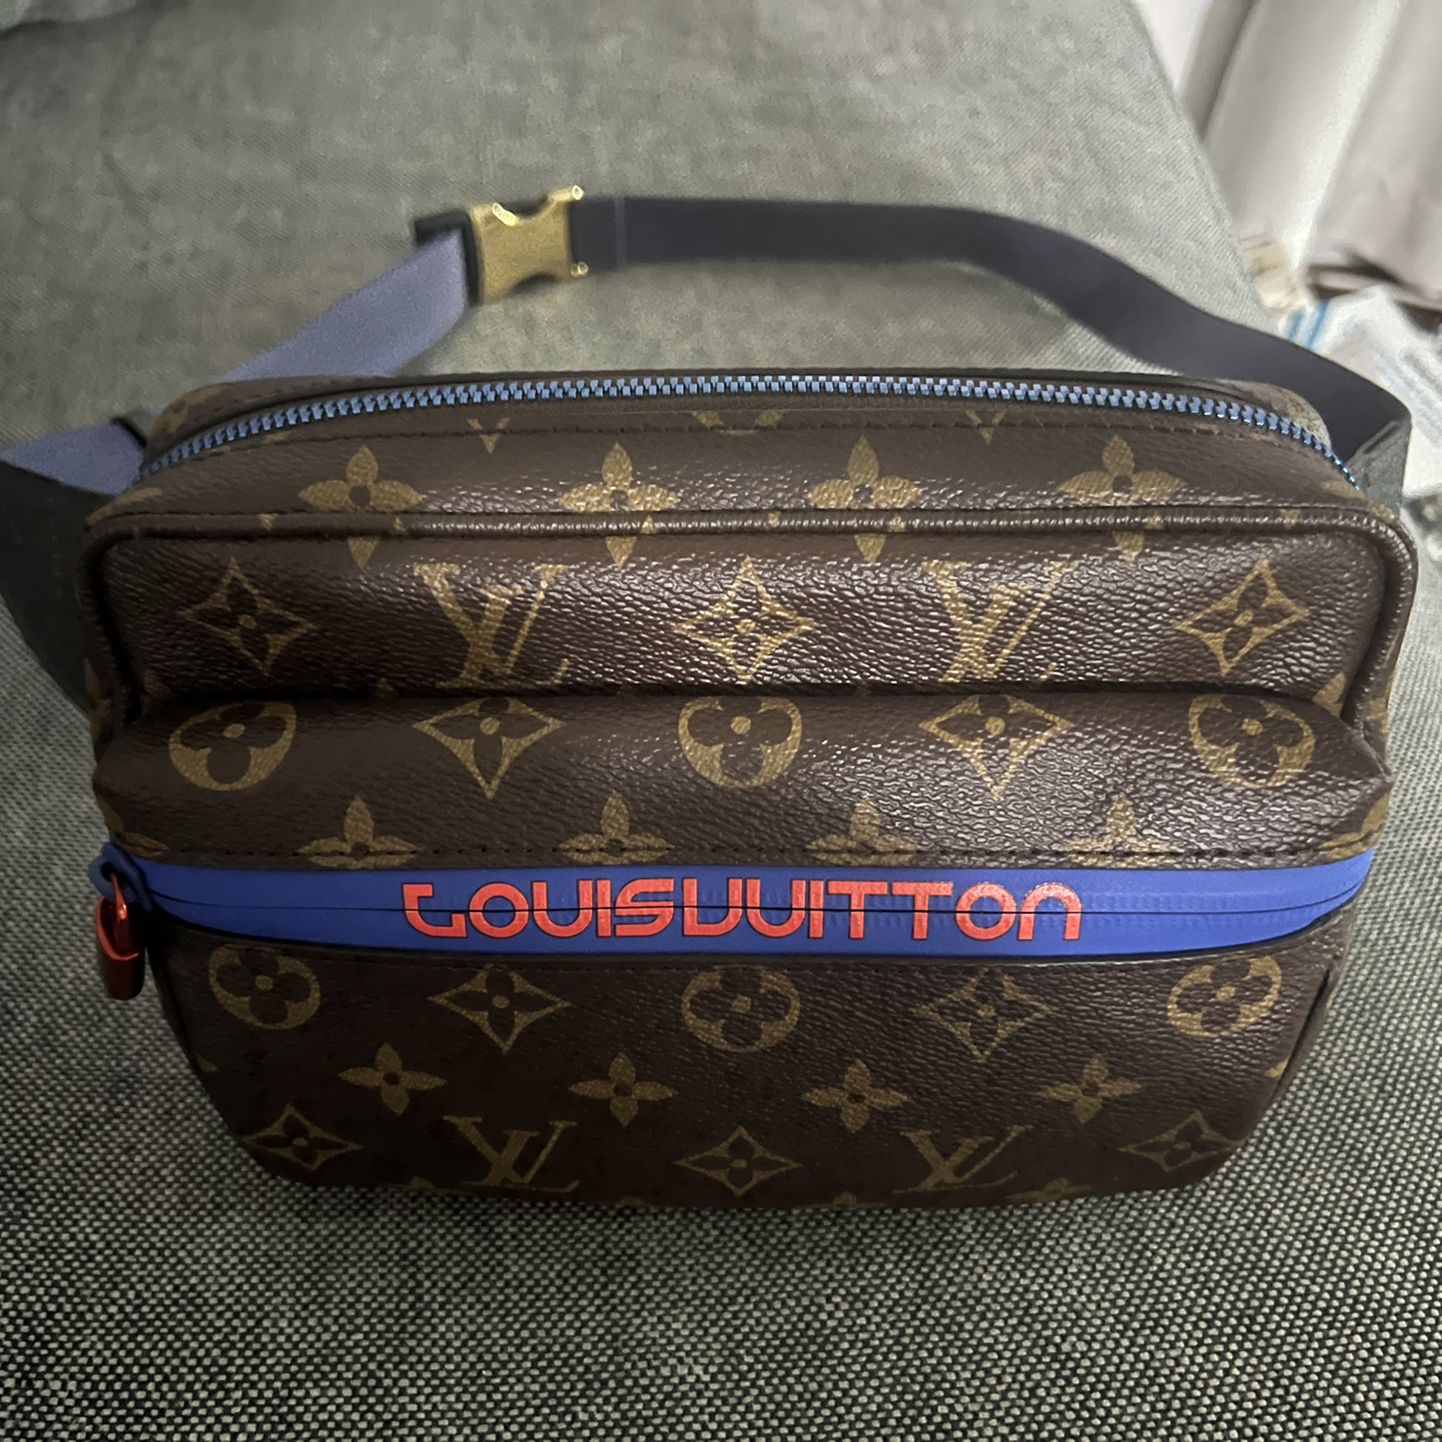 Brand New Authentic Louis Vuitton Bumbag for Sale in Houston, TX - OfferUp